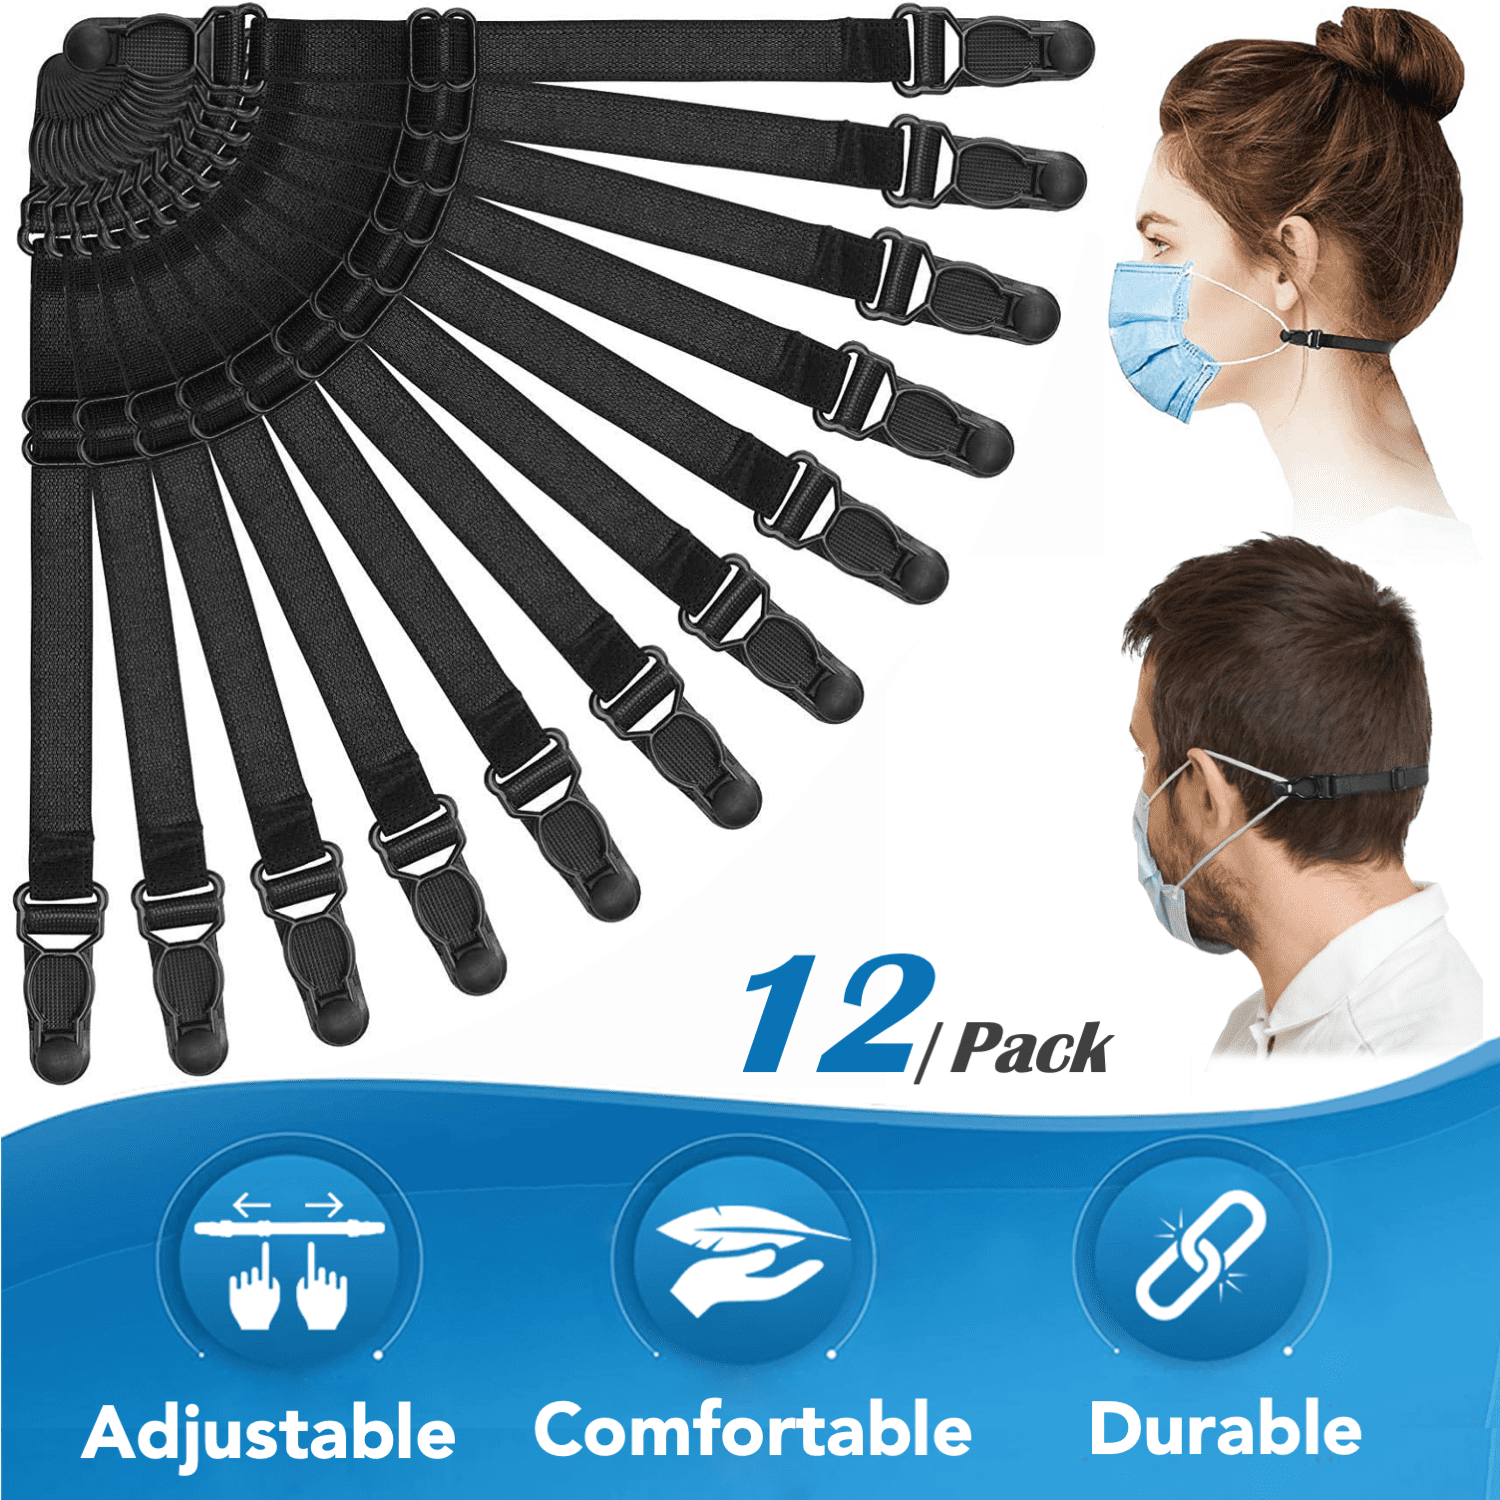 3PK Blue and 3PK Black Anti-Tightening Mask Holder Hook Ear Strap Accessories Ear Grips Extension Mask Buckle Ear Pain Relieved for Adults Kids 6PK Mask Extenders/Ear Savers Mask Ear Strap Hook Mask Strap Extender